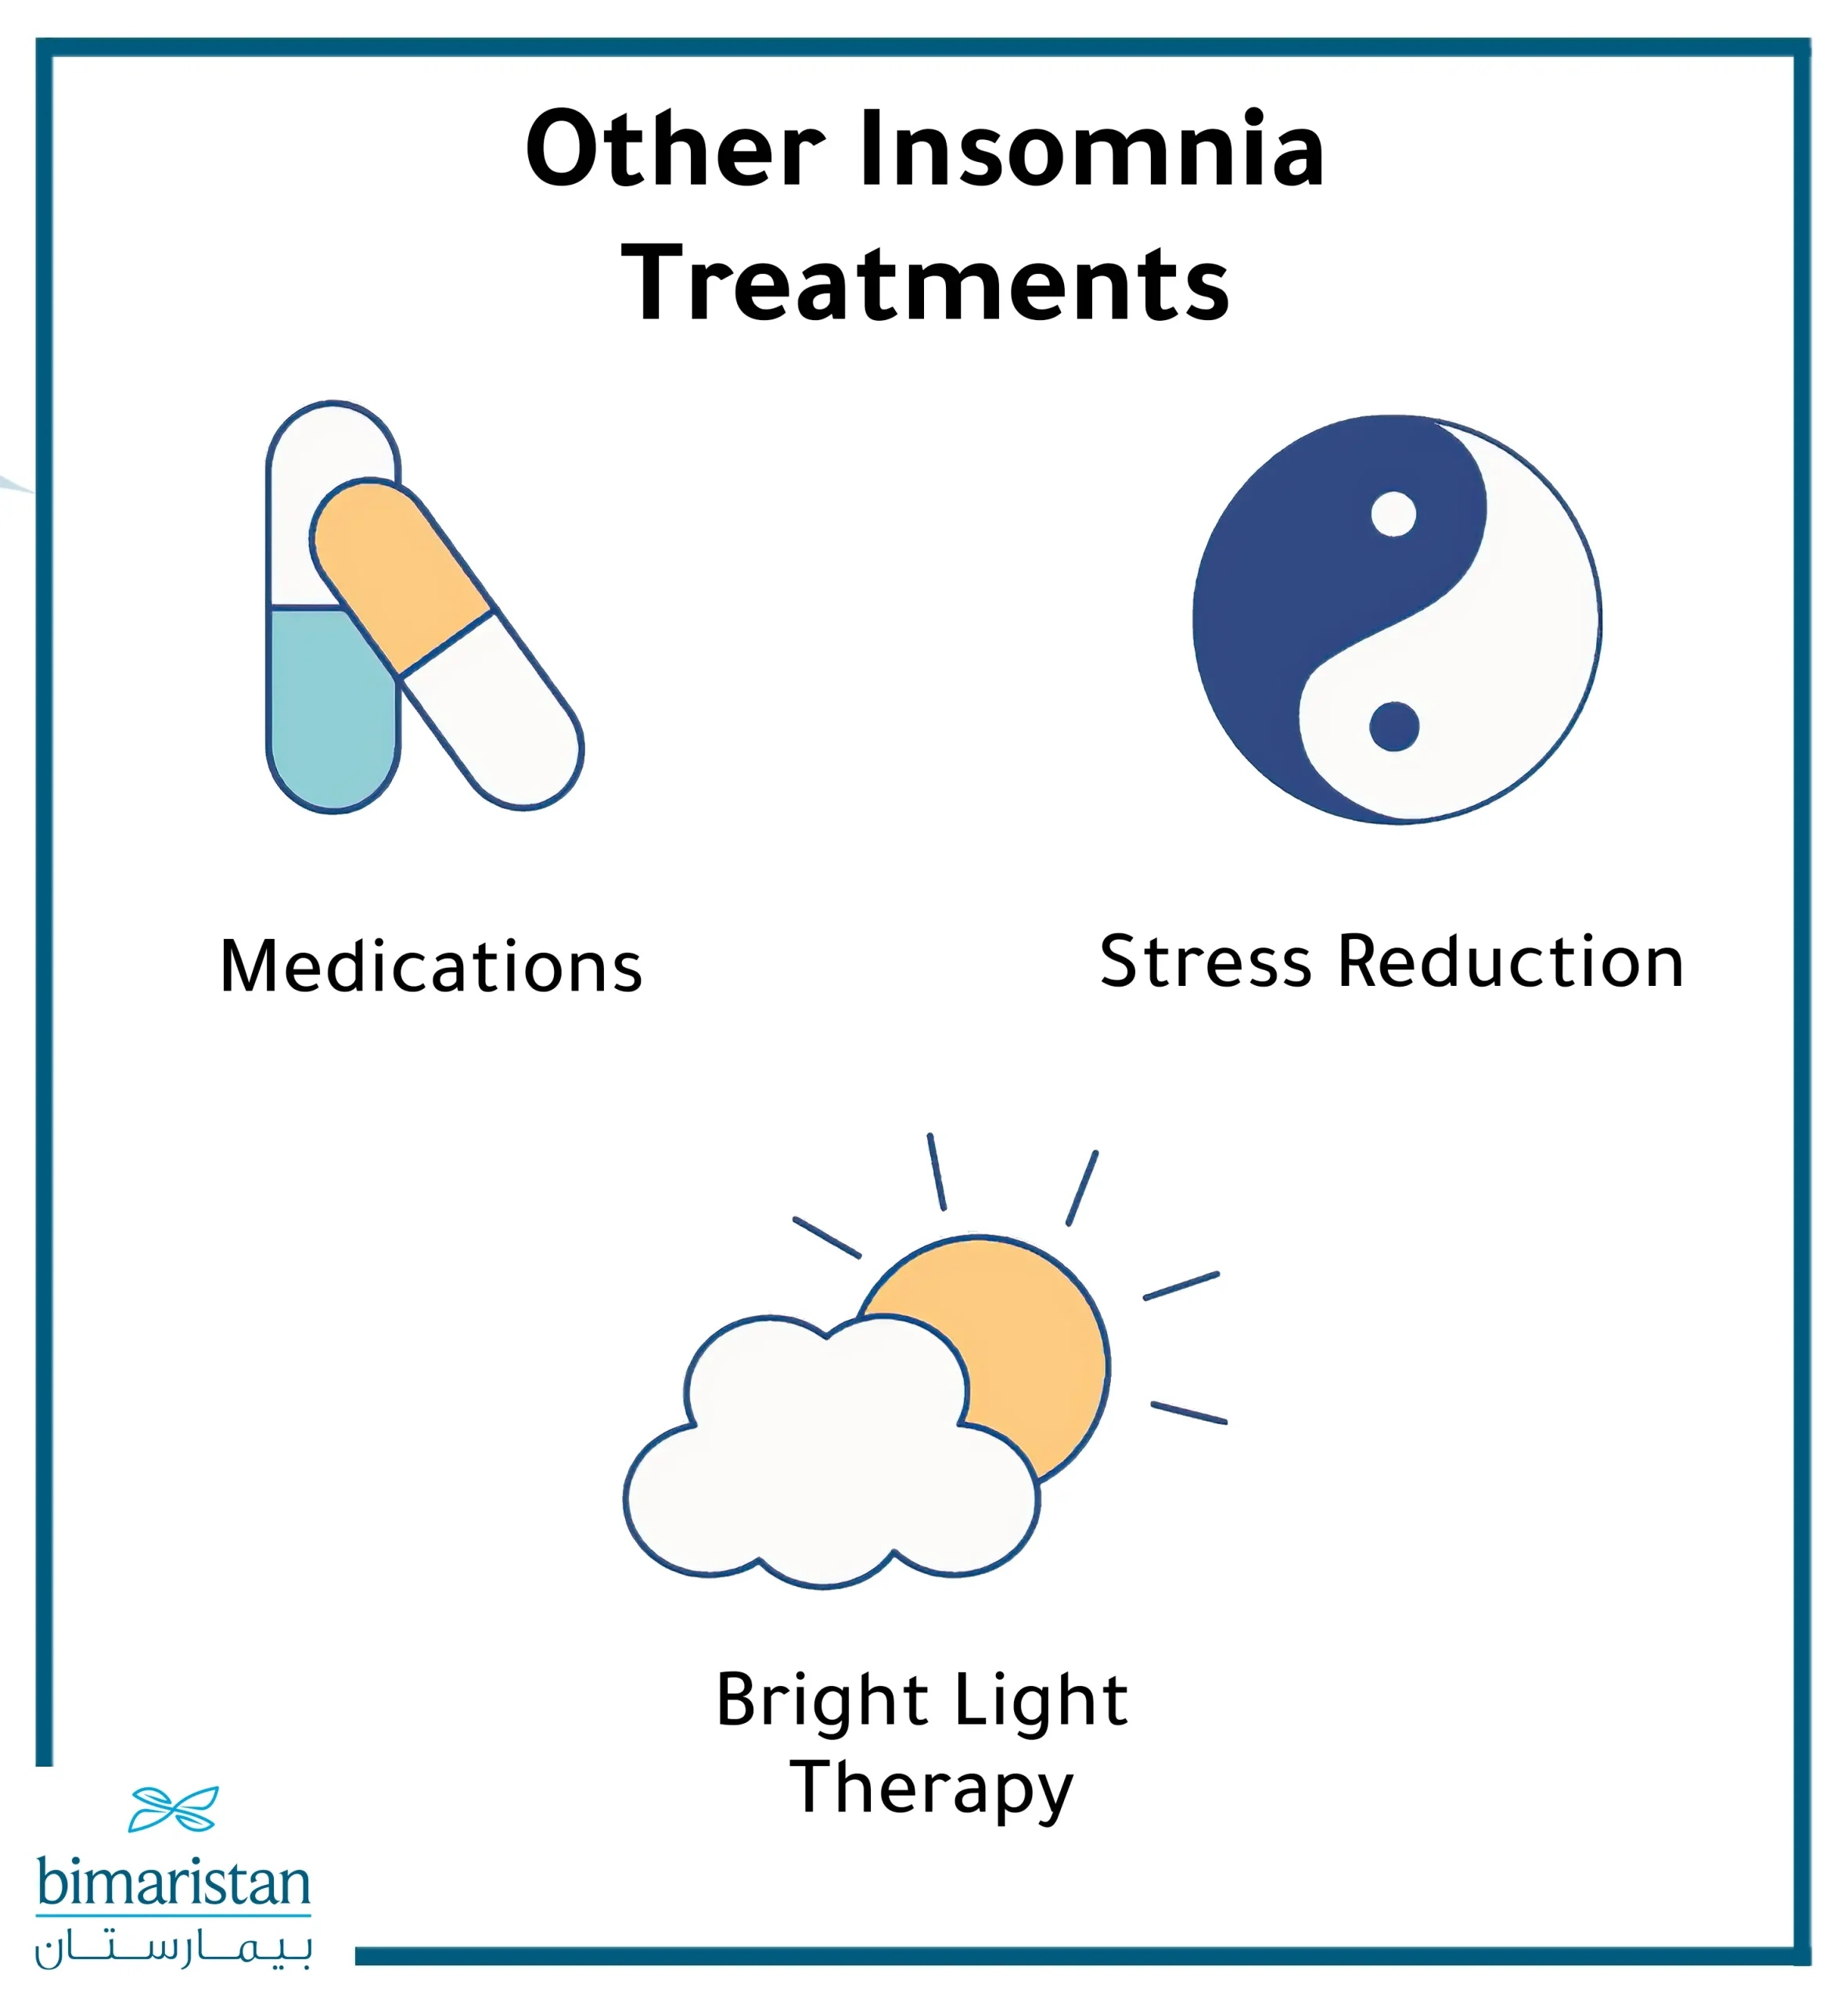 Ways of treatment for insomnia